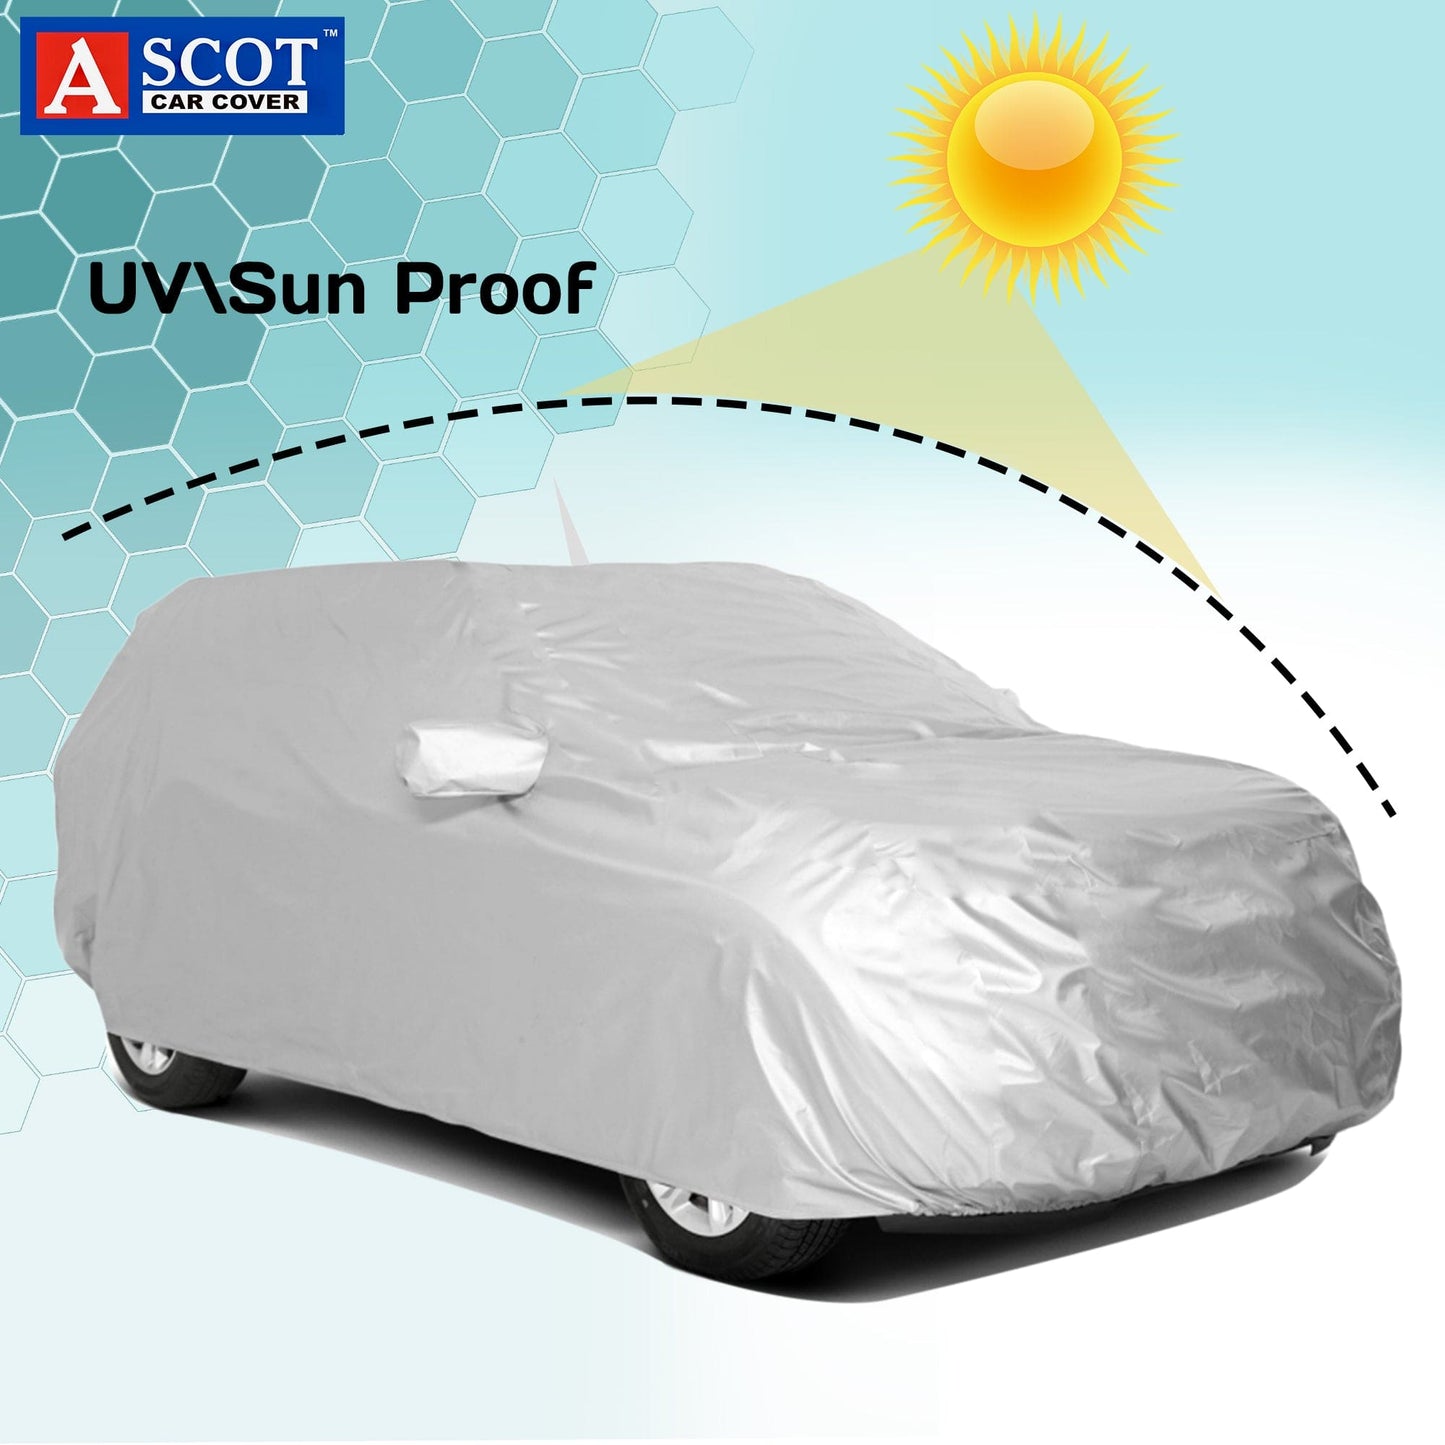 Ascot Tata Punch Car Body Cover with Mirror and Back Antenna Pockets Dust Proof, Trippel Stitched